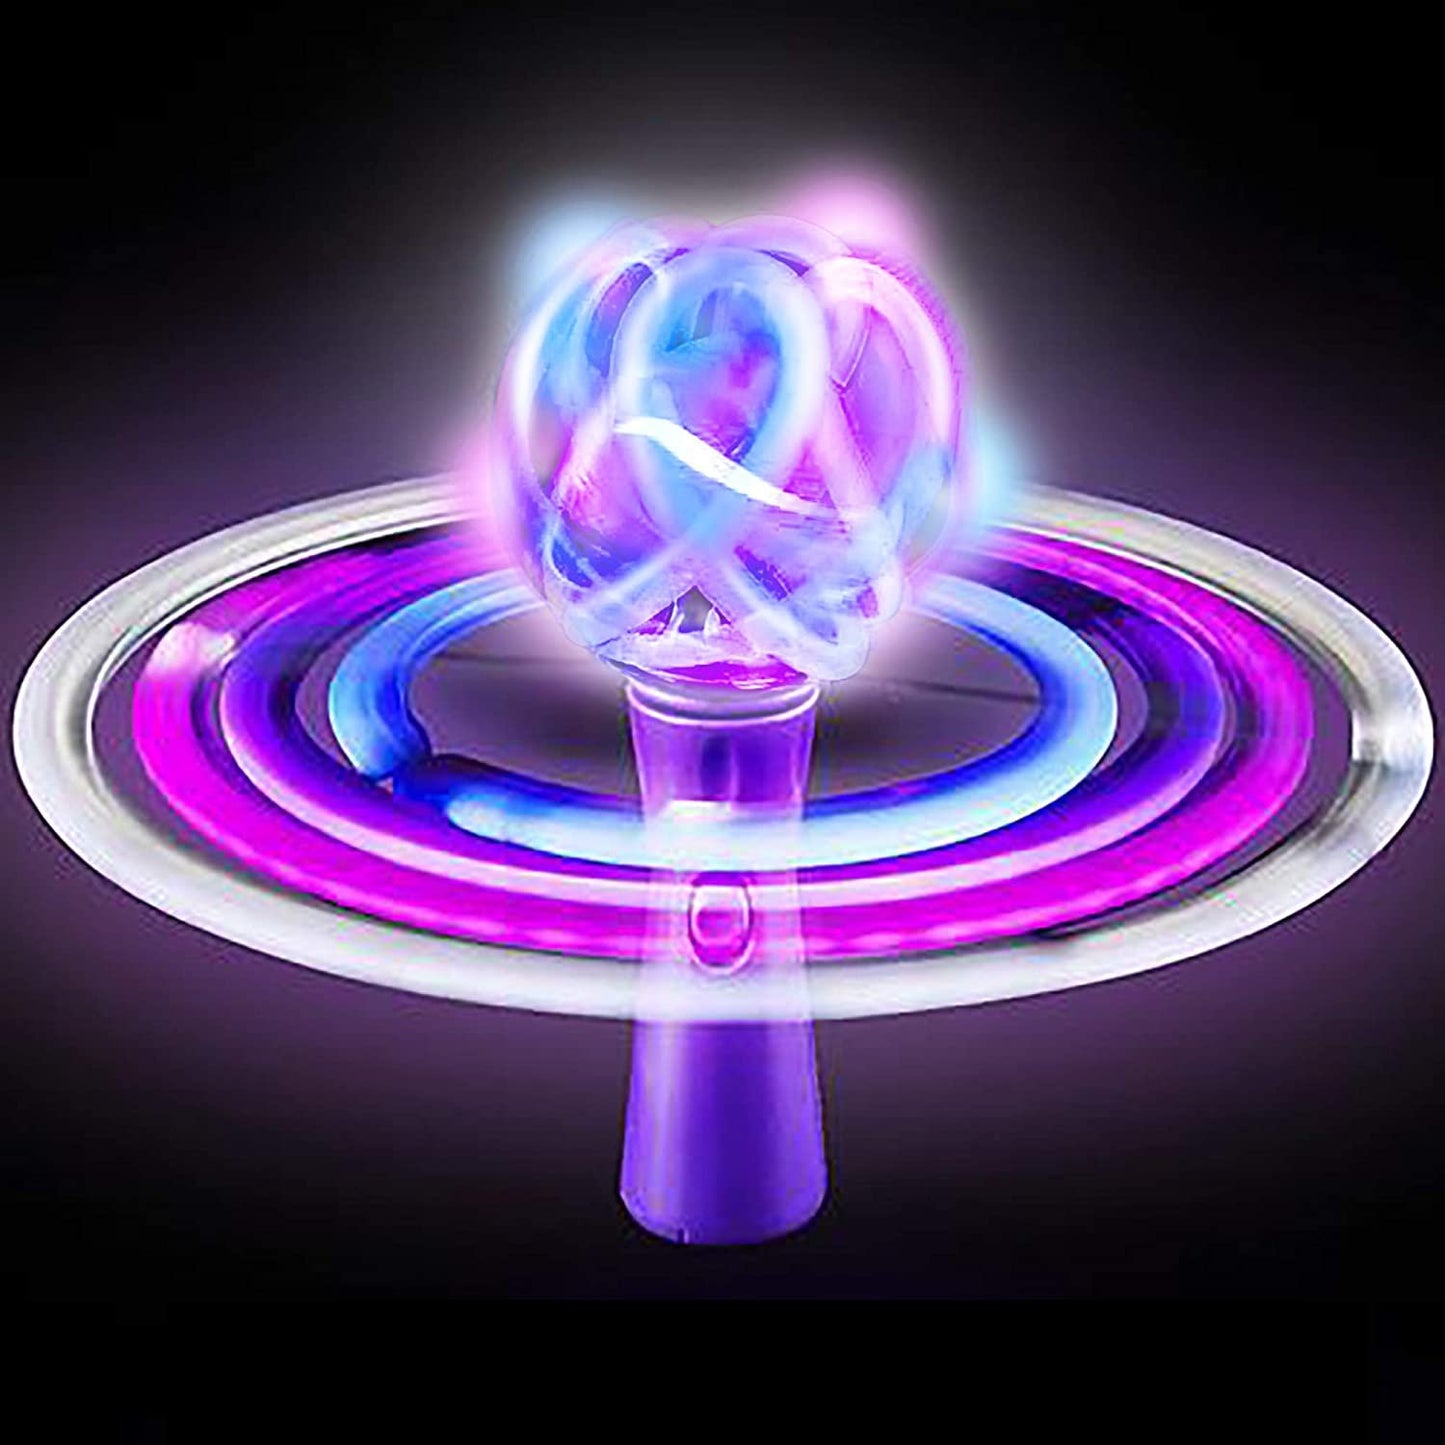 ArtCreativity Light Up Galaxy Orbiter Wand - 9 Inch LED Electronic Spin Toy for Kids with Batteries Included - Great Gift Idea for Boys, Girls, Toddlers - Fun Birthday Party Favor, Carnival Prize